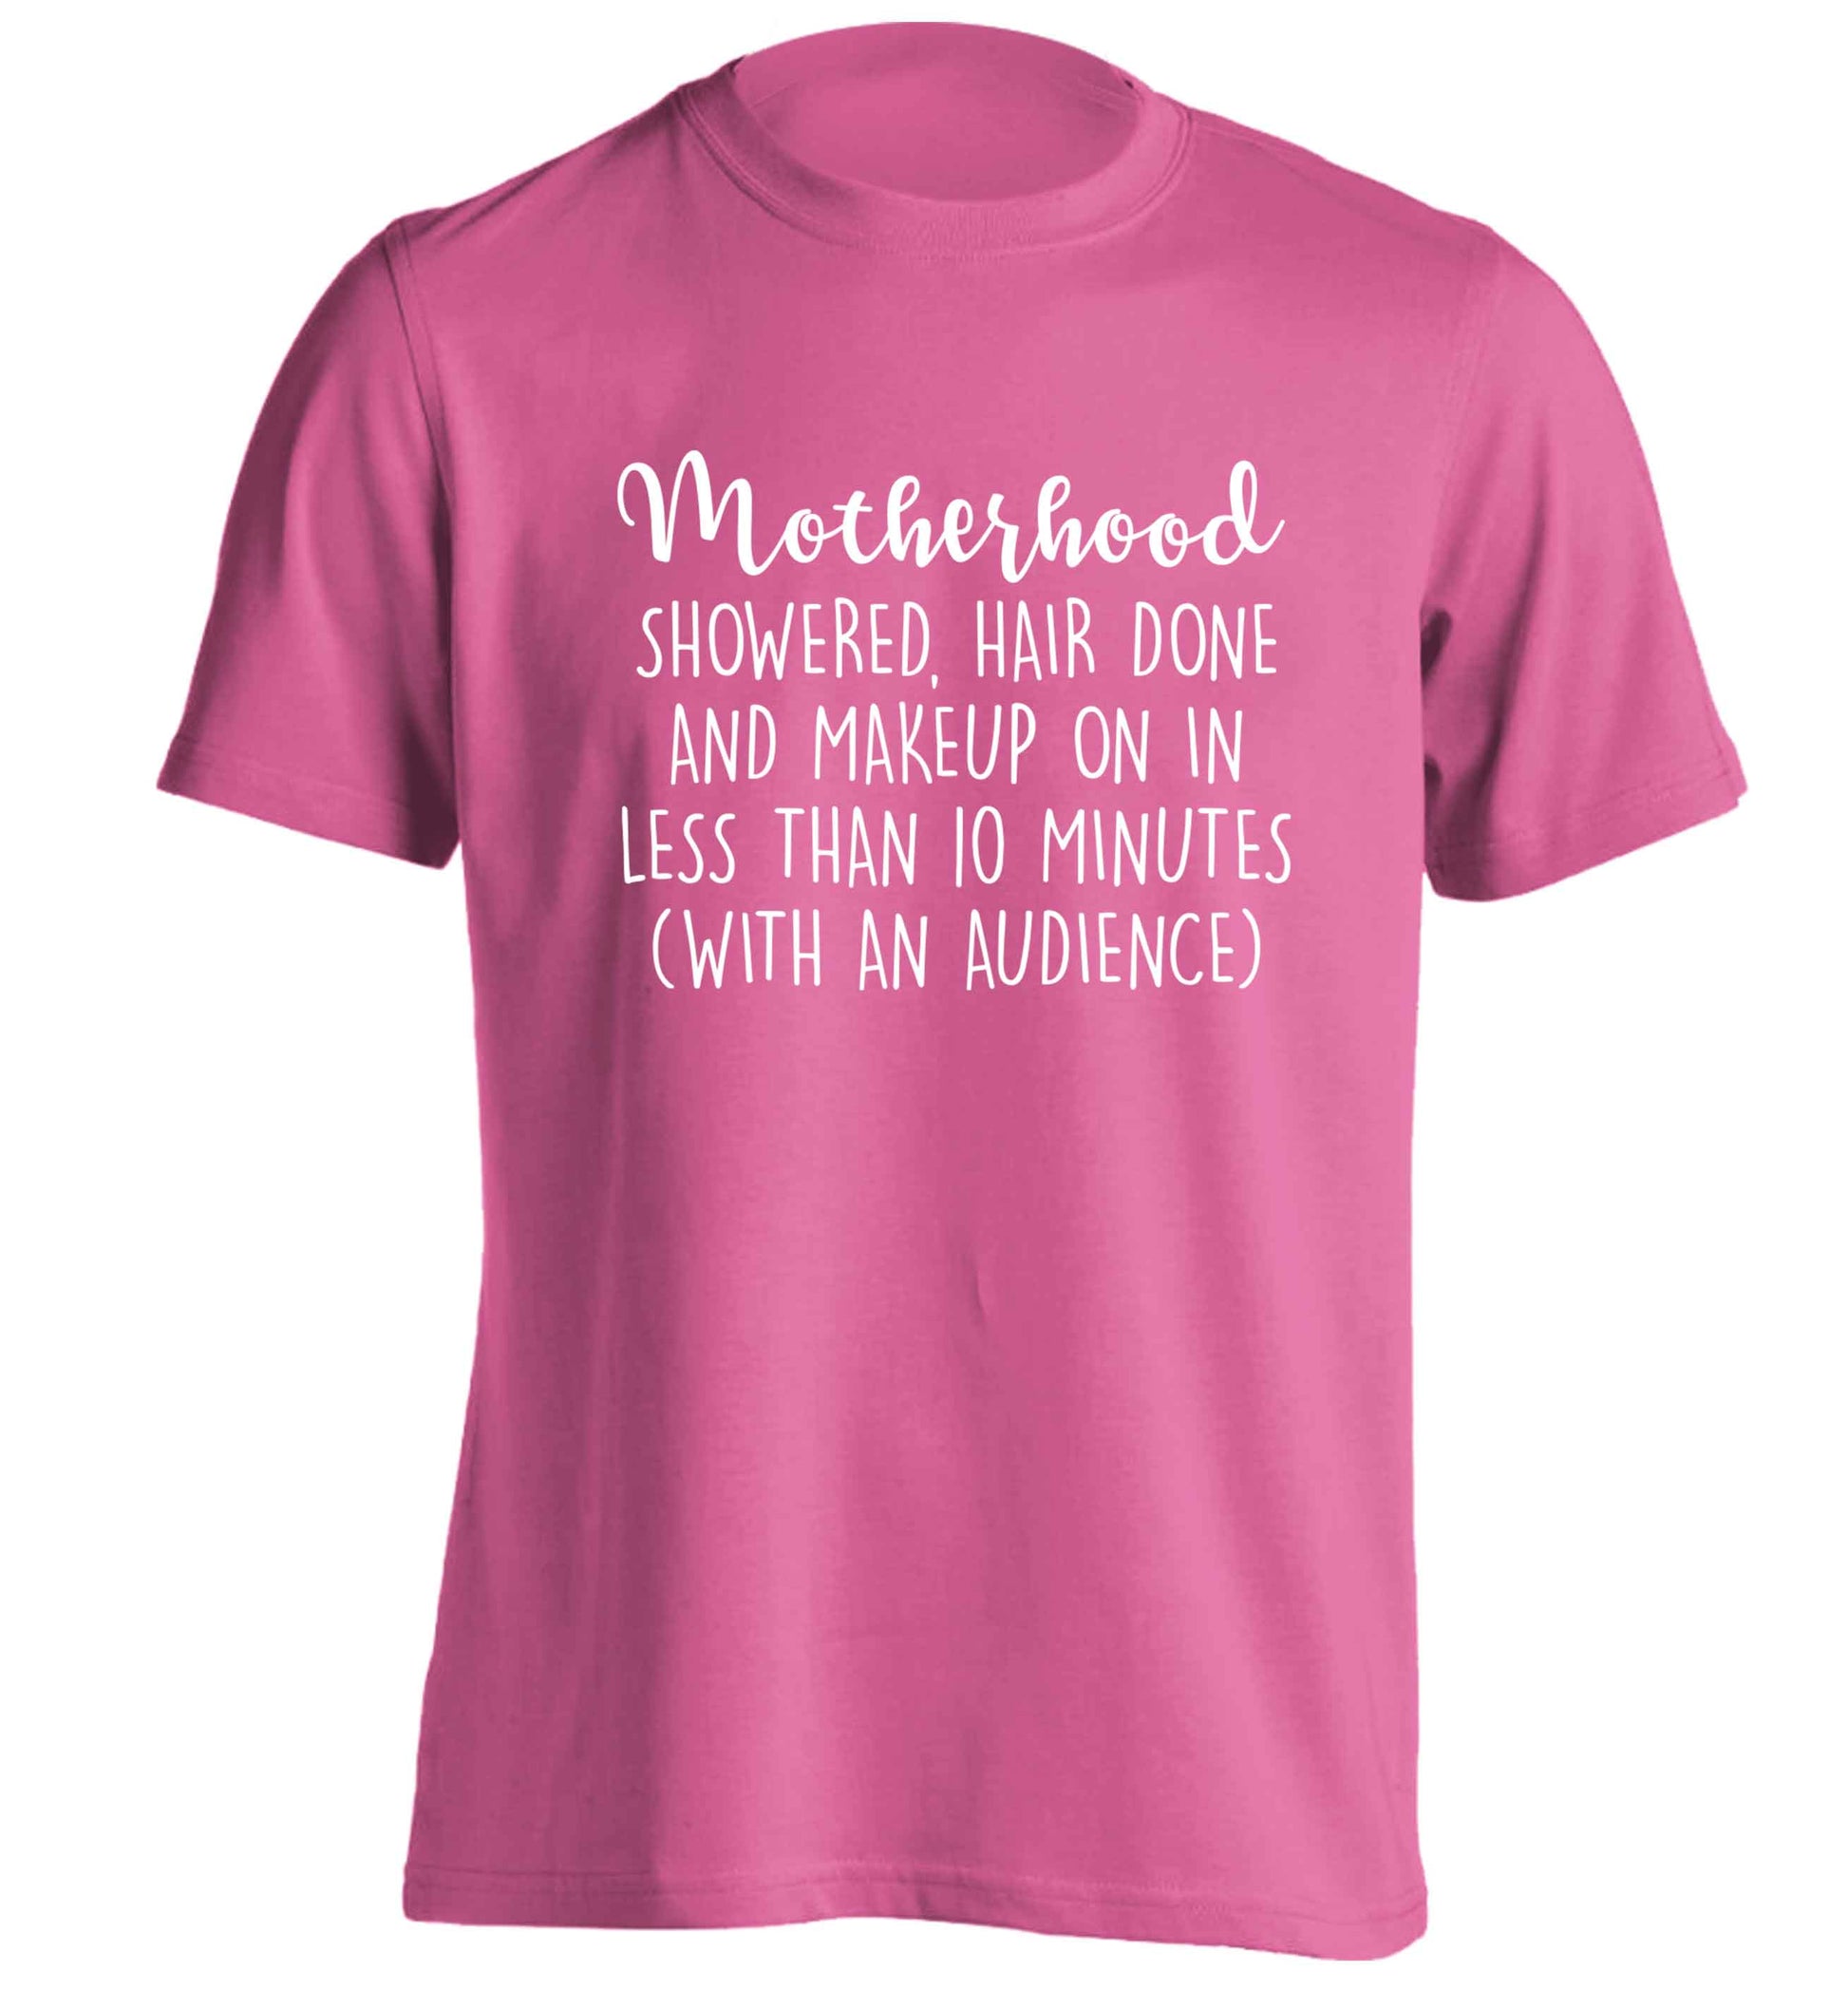 Motherhood, showered, hair done and makeup on adults unisex pink Tshirt 2XL